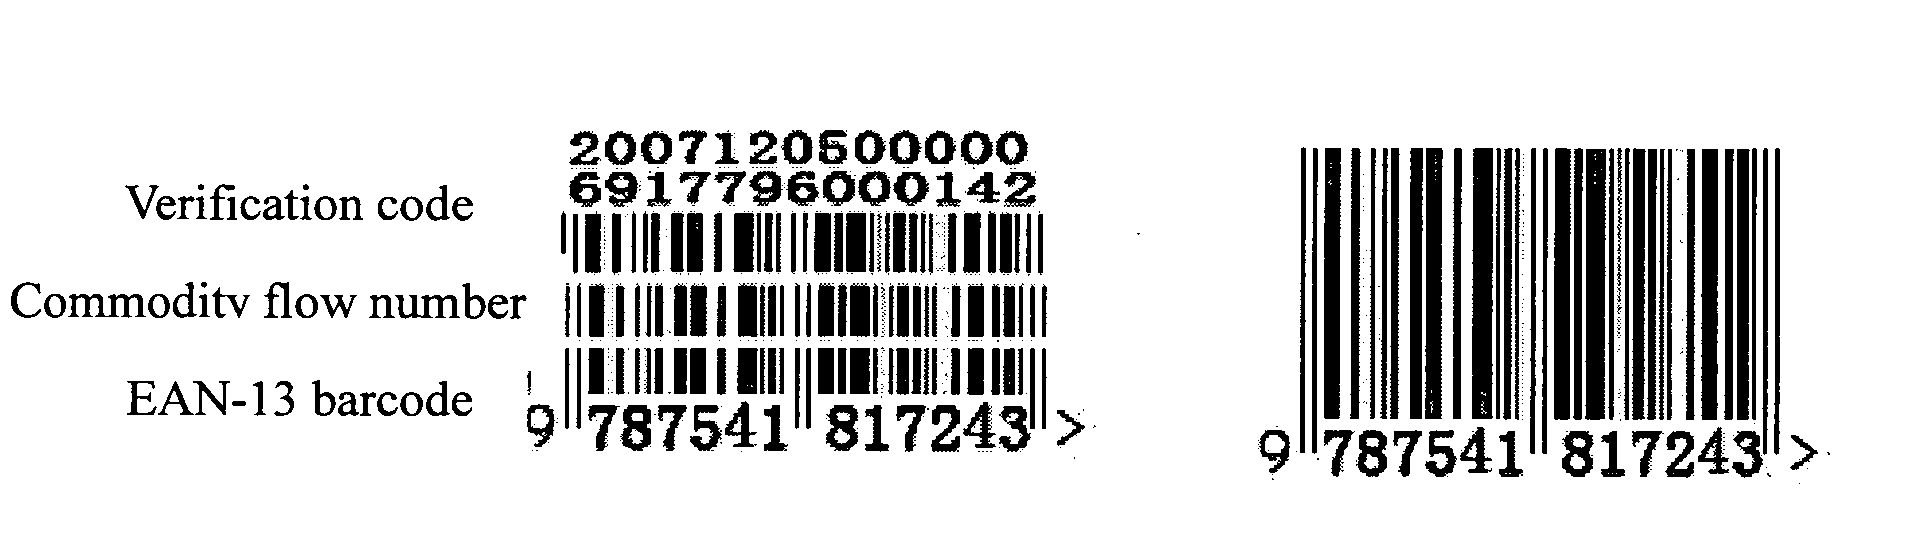 3-in-1 barcode for identifying commodity